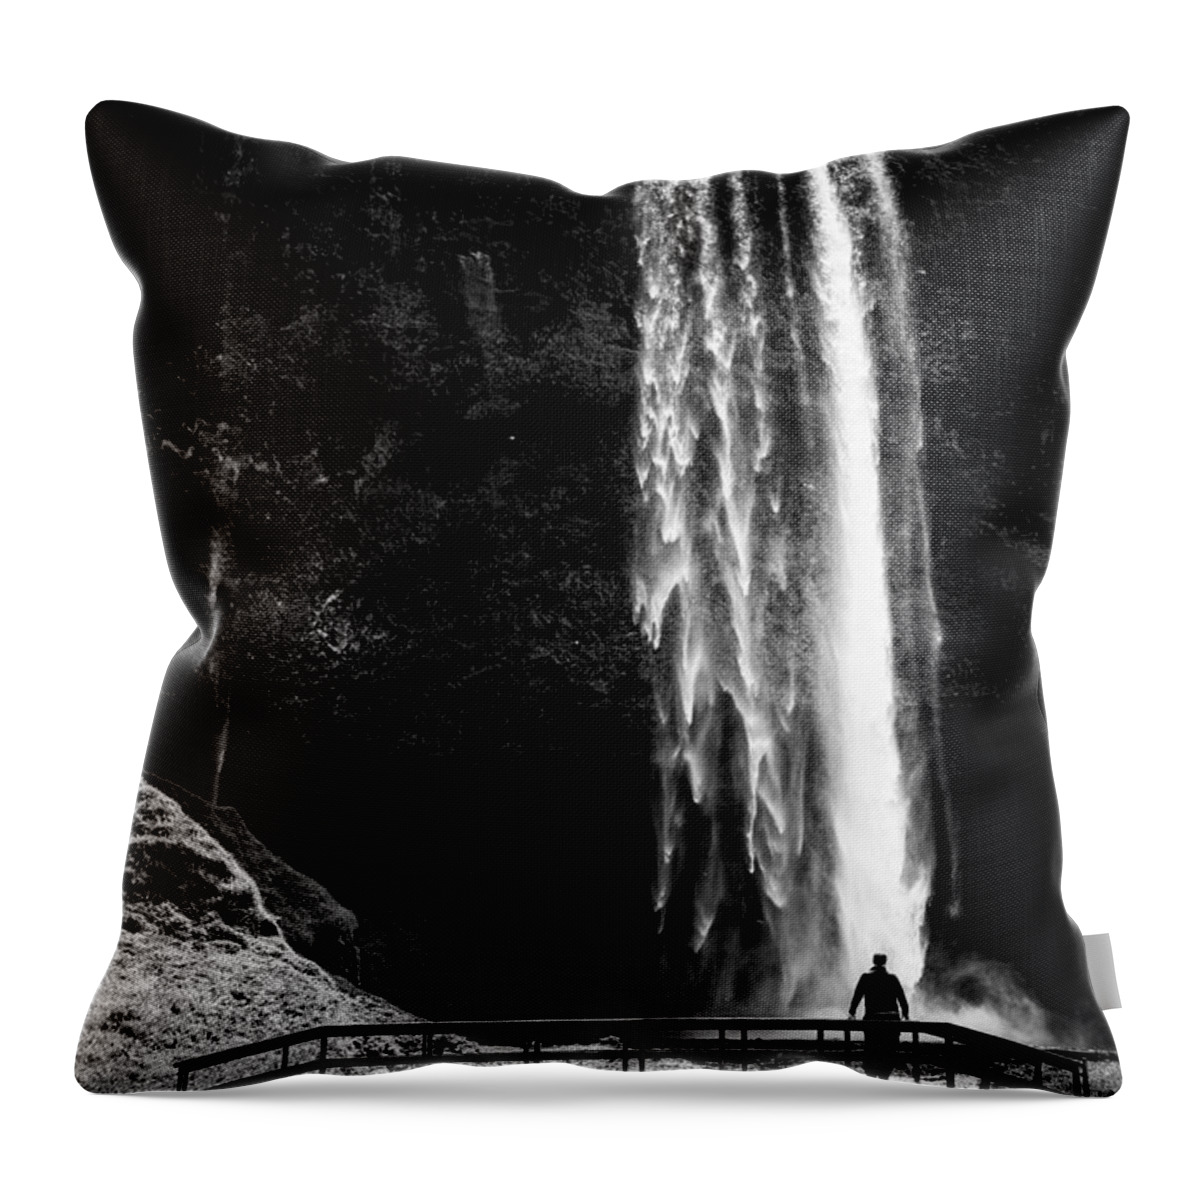 Iceland Throw Pillow featuring the photograph Waterfall Seljalandsfoss Iceland black and white stark contrast by Matthias Hauser